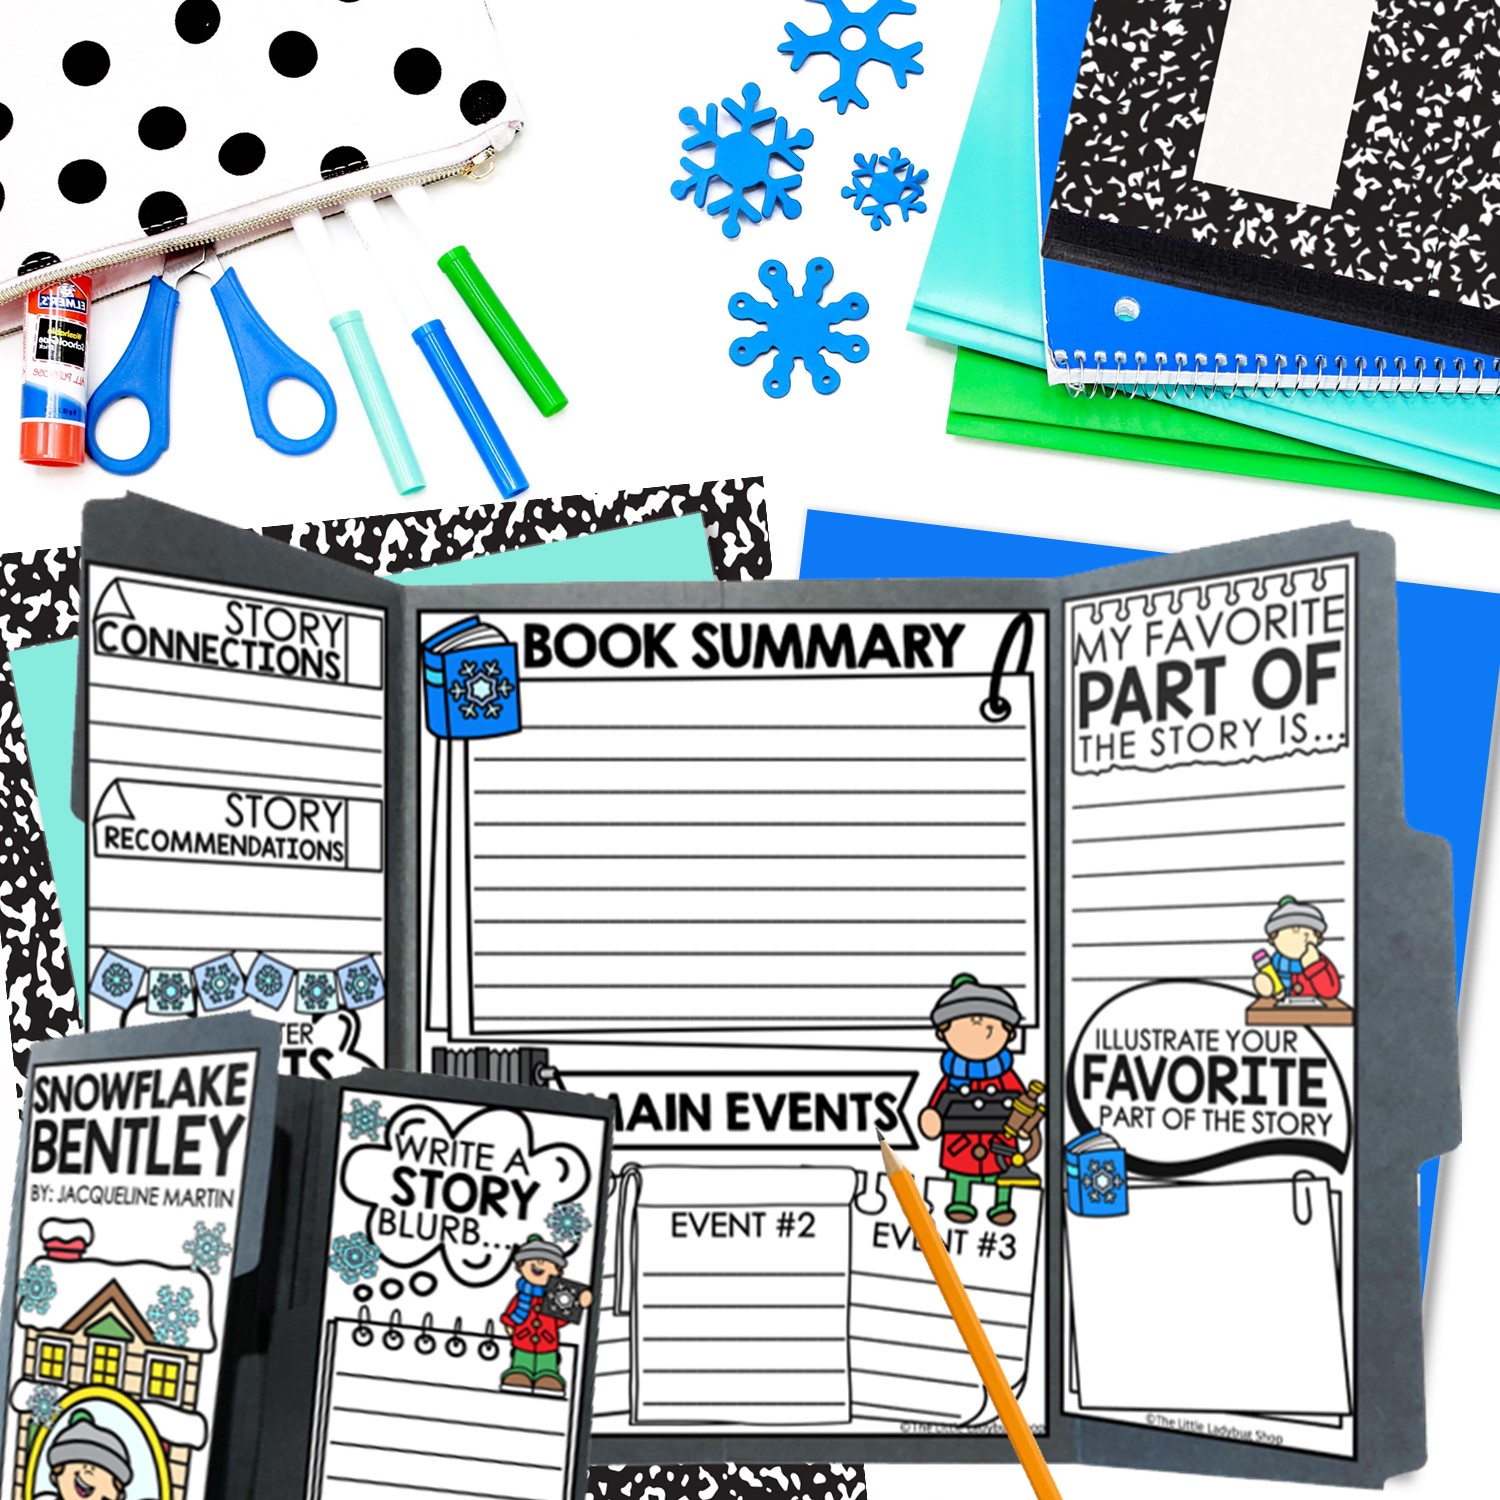 Engaging December and Winter-Themed Activities for Upper Elementary Classrooms